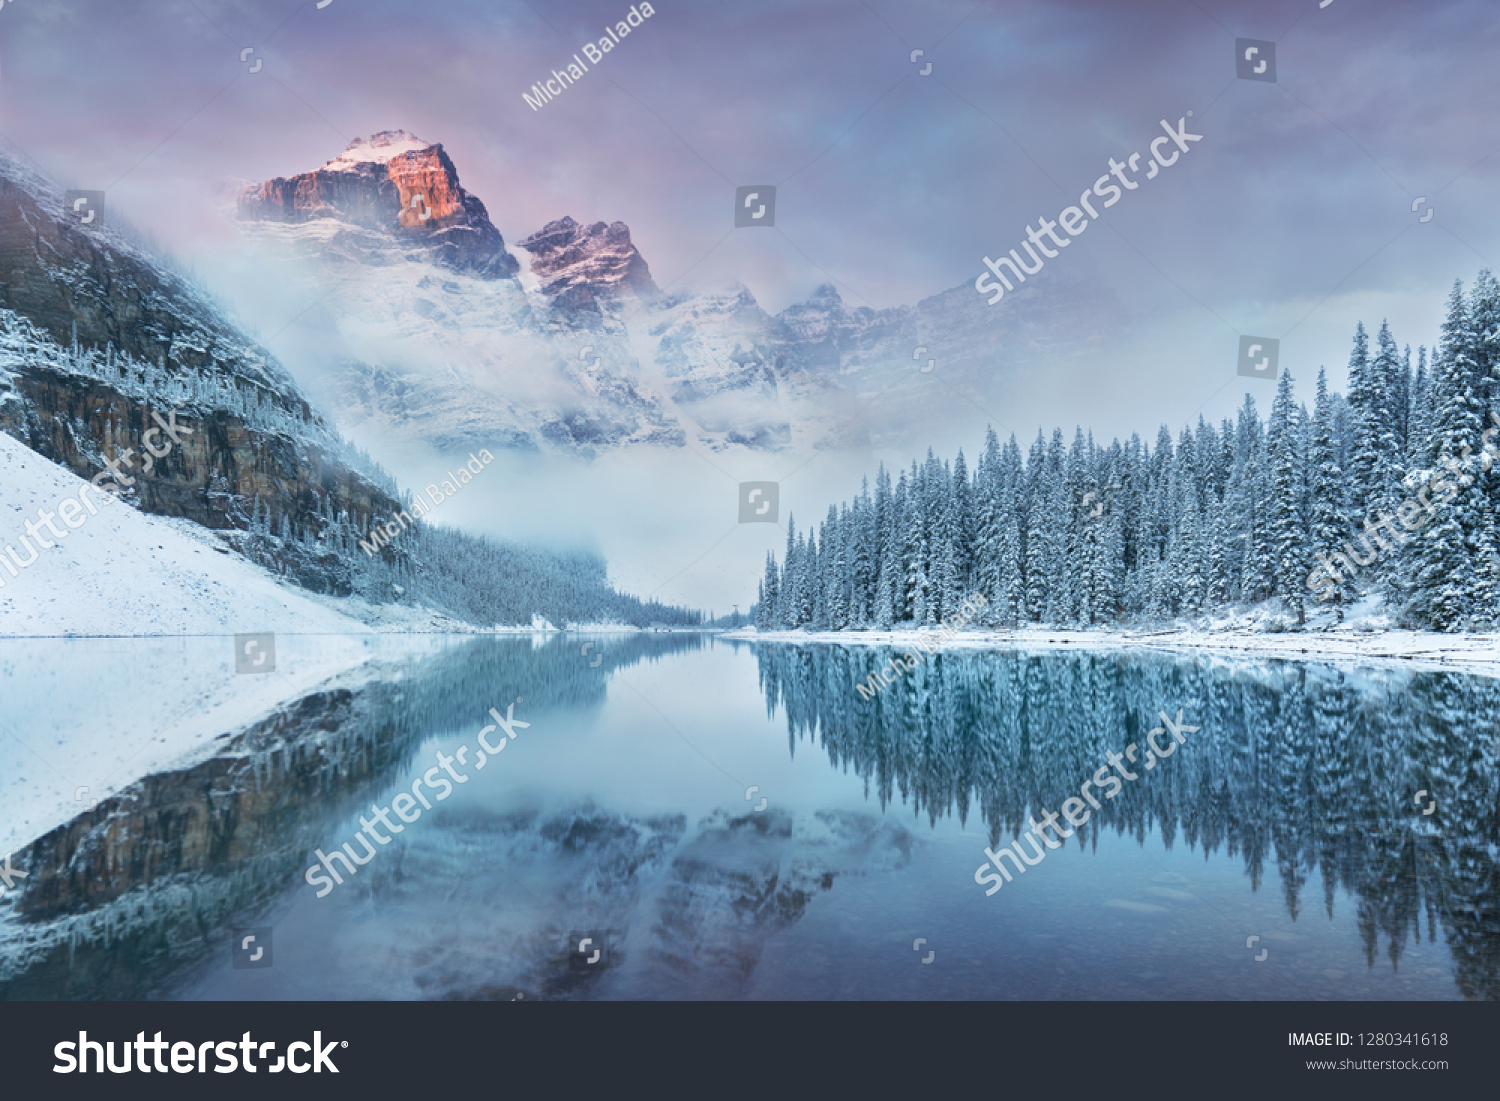 First snow Morning at Moraine Lake in Banff National Park Alberta Canada
Snow-covered winter mountain lake in a winter atmosphere. Beautiful background photo #1280341618